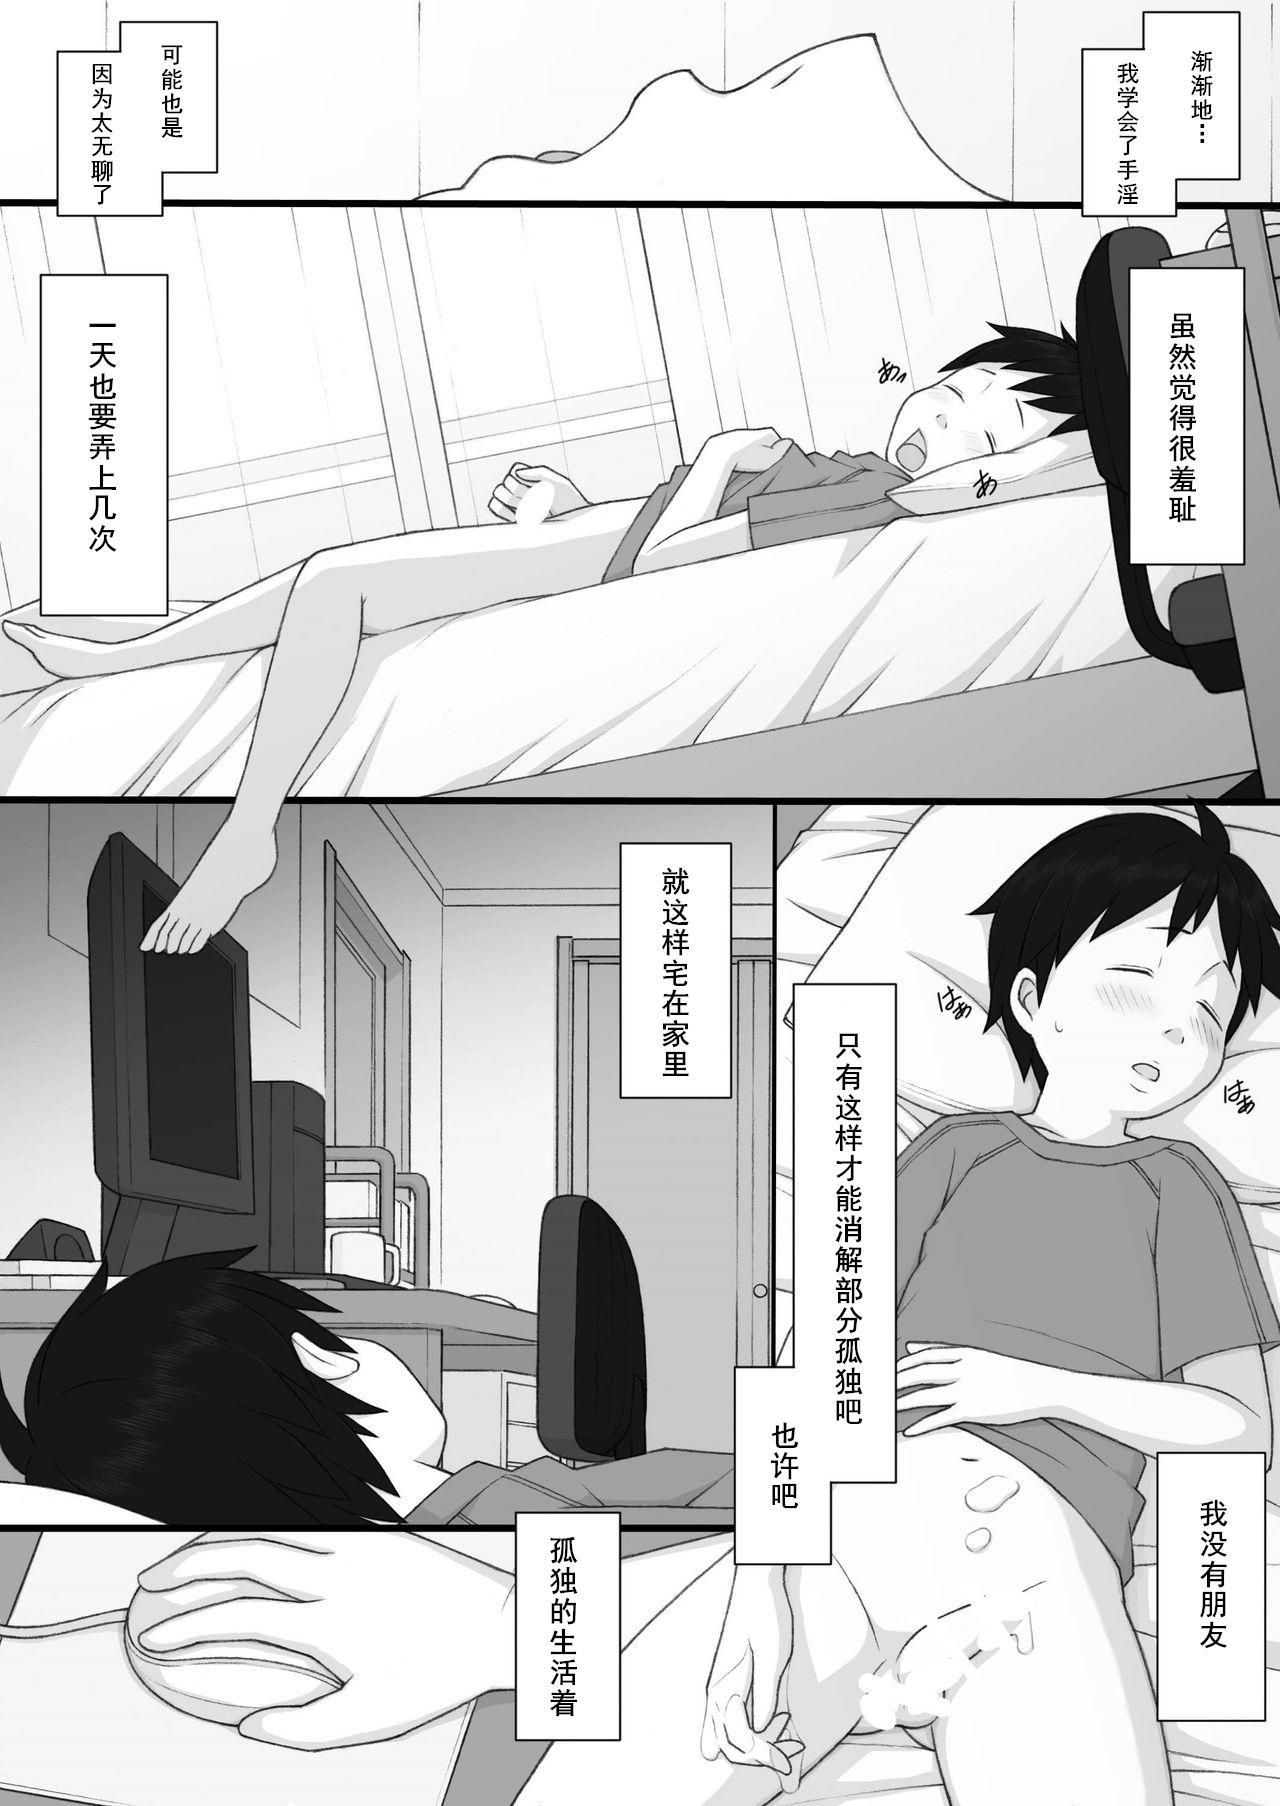 Freak [Ponpharse] Ponpharse - The Non-Fiction [Chinese] [cqxl自己汉化] - Original Perfect Ass - Page 7